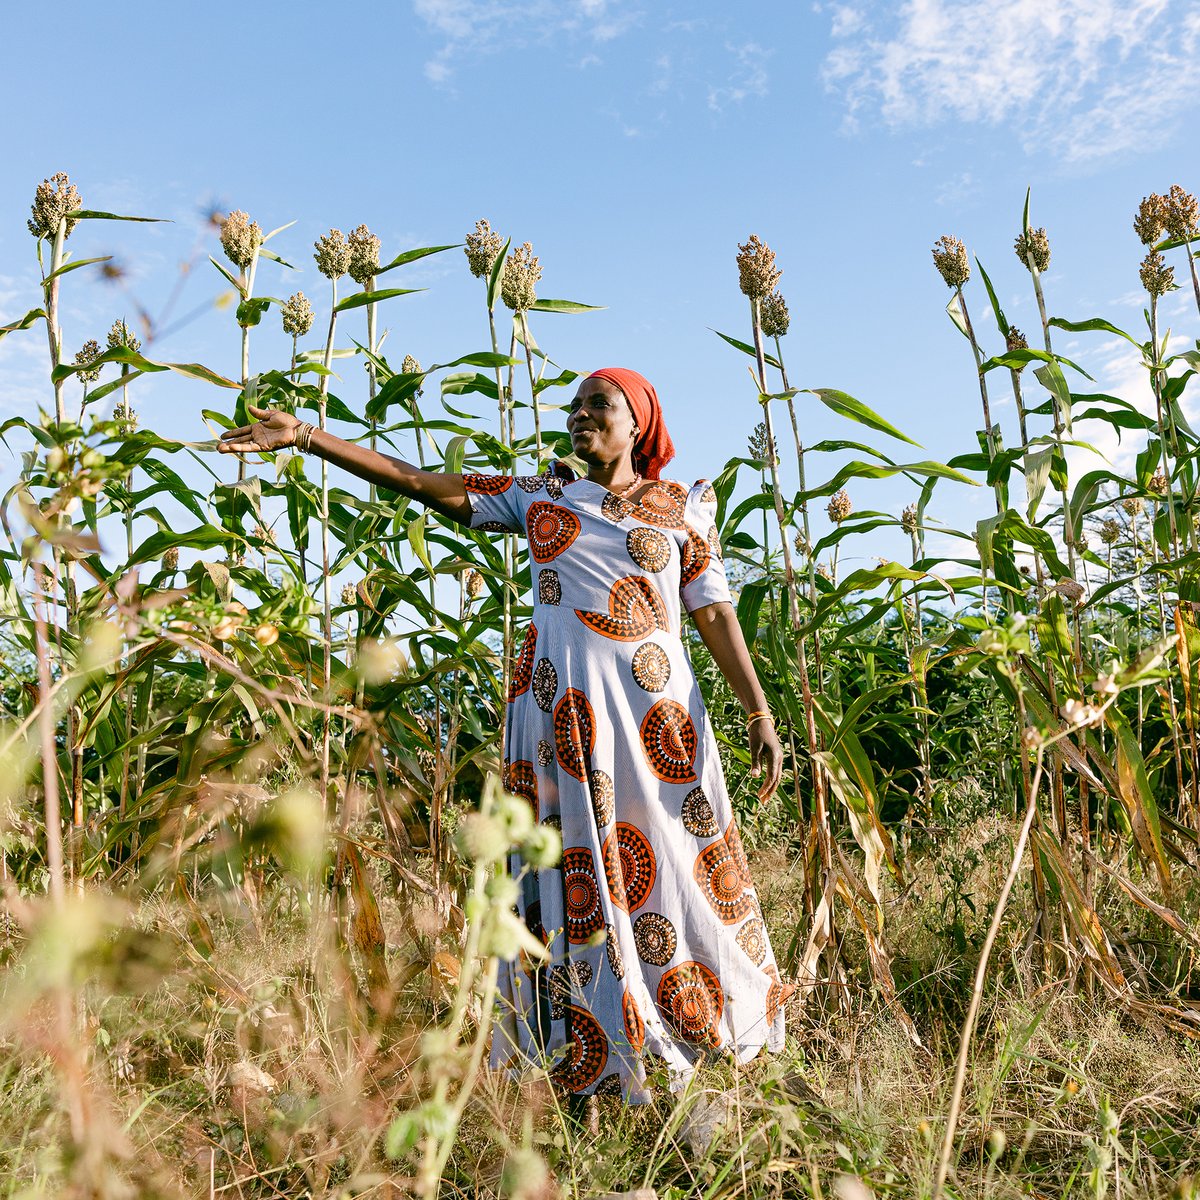 Women are transforming their own lives and landscapes. Farmer groups in our program are required to be composed of at least 30% women. Most exceed that benchmark, with many led by or composed entirely of women farmers.